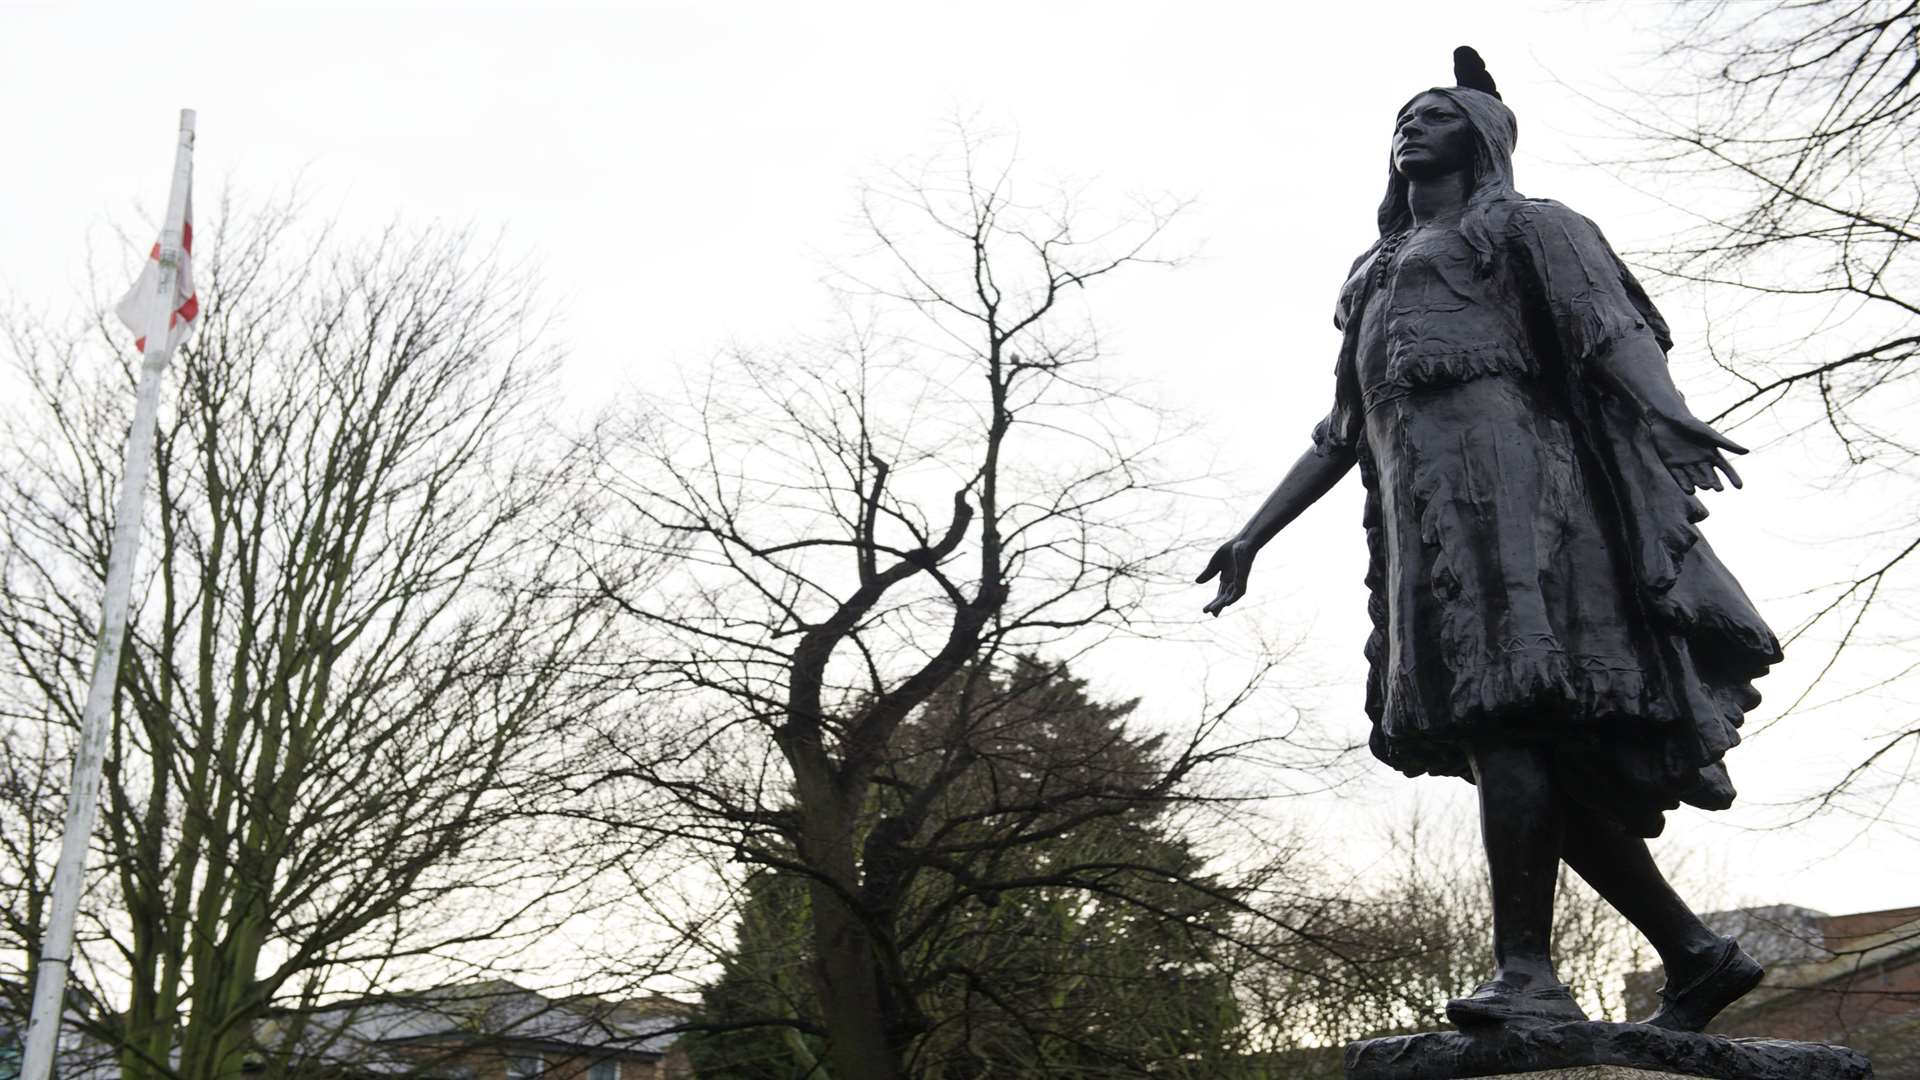 The statue of Pocahontas next to St George's Church in Gravesend